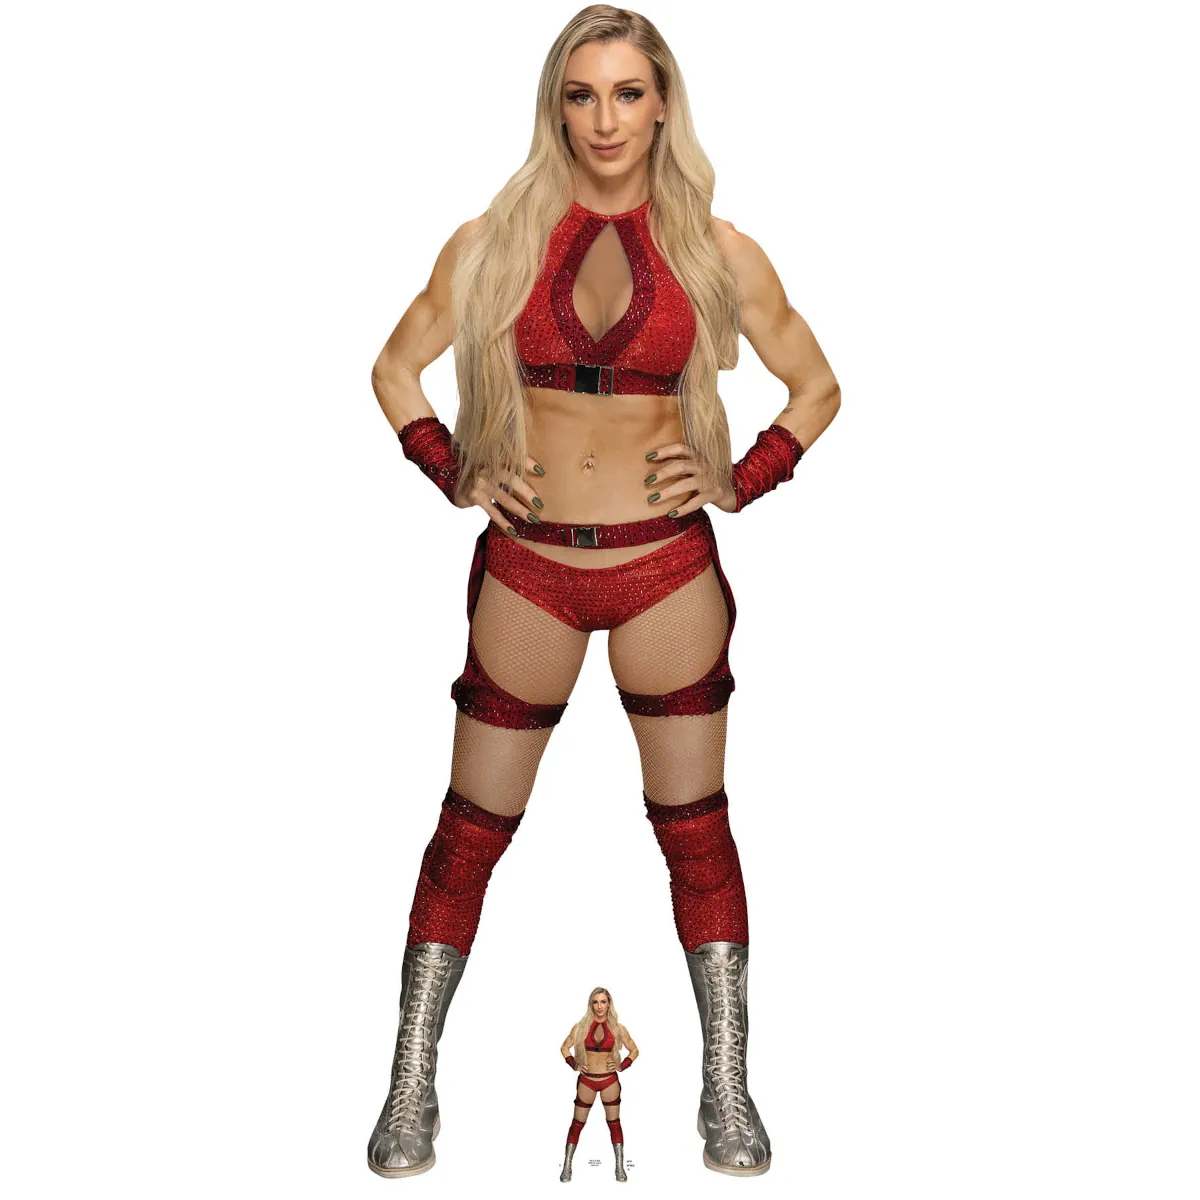 SC4429 Charlotte Flair 'Red Outfit' (WWE) Official Lifesize + Mini Cardboard Cutout Standee Front